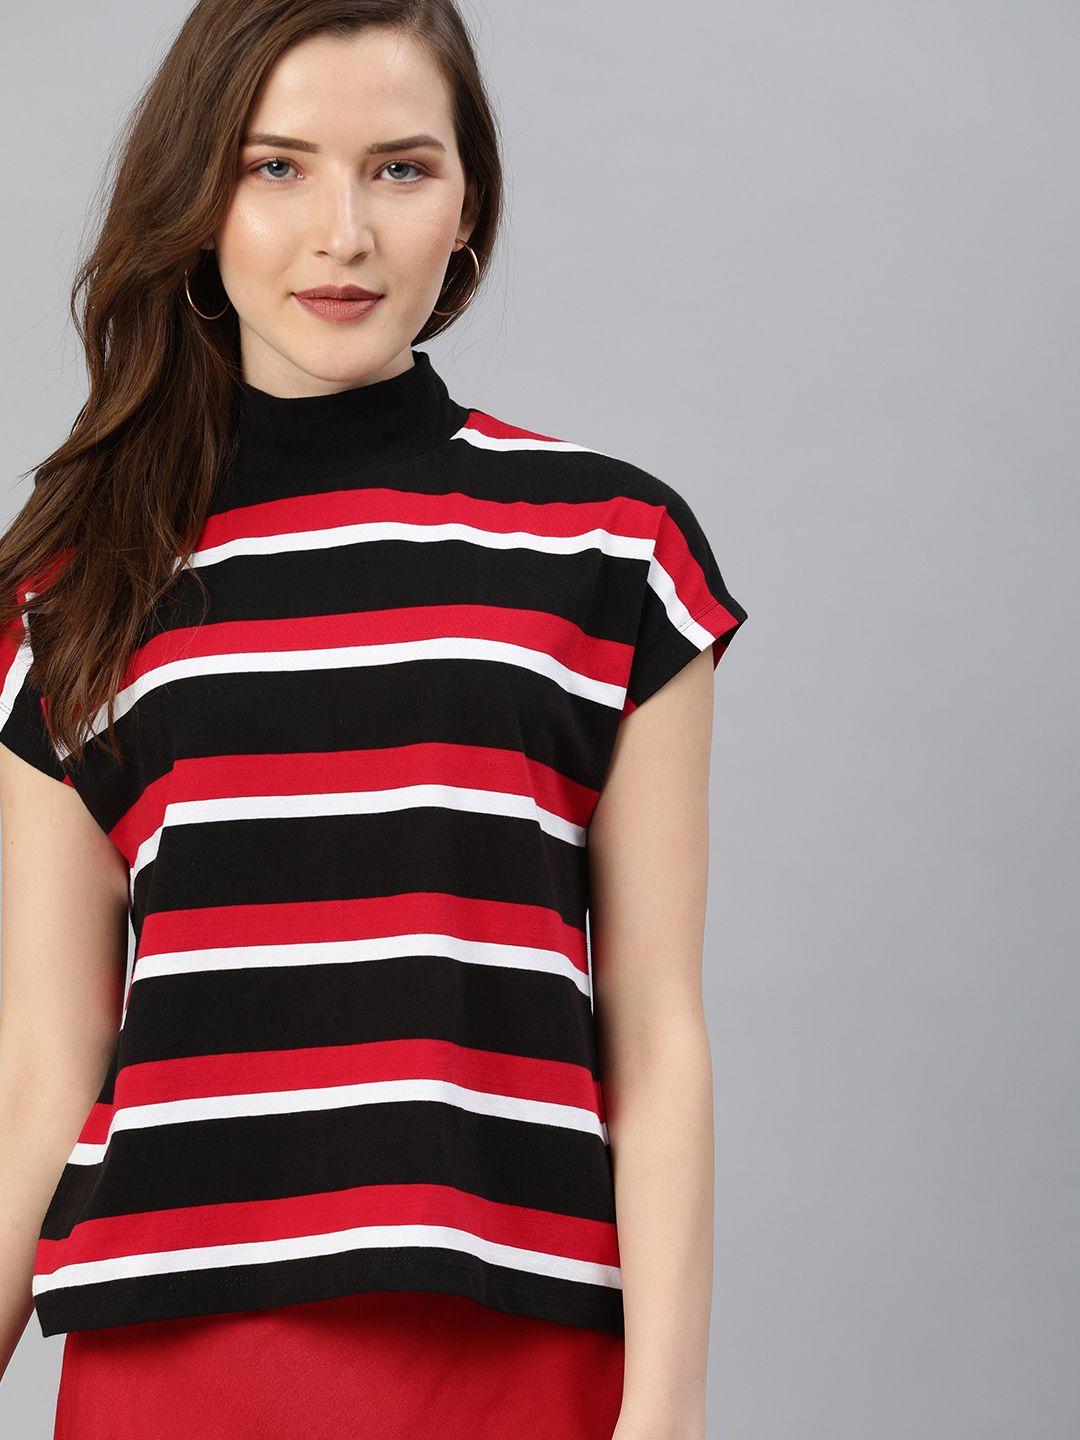 here&now women black & red striped high neck t-shirt